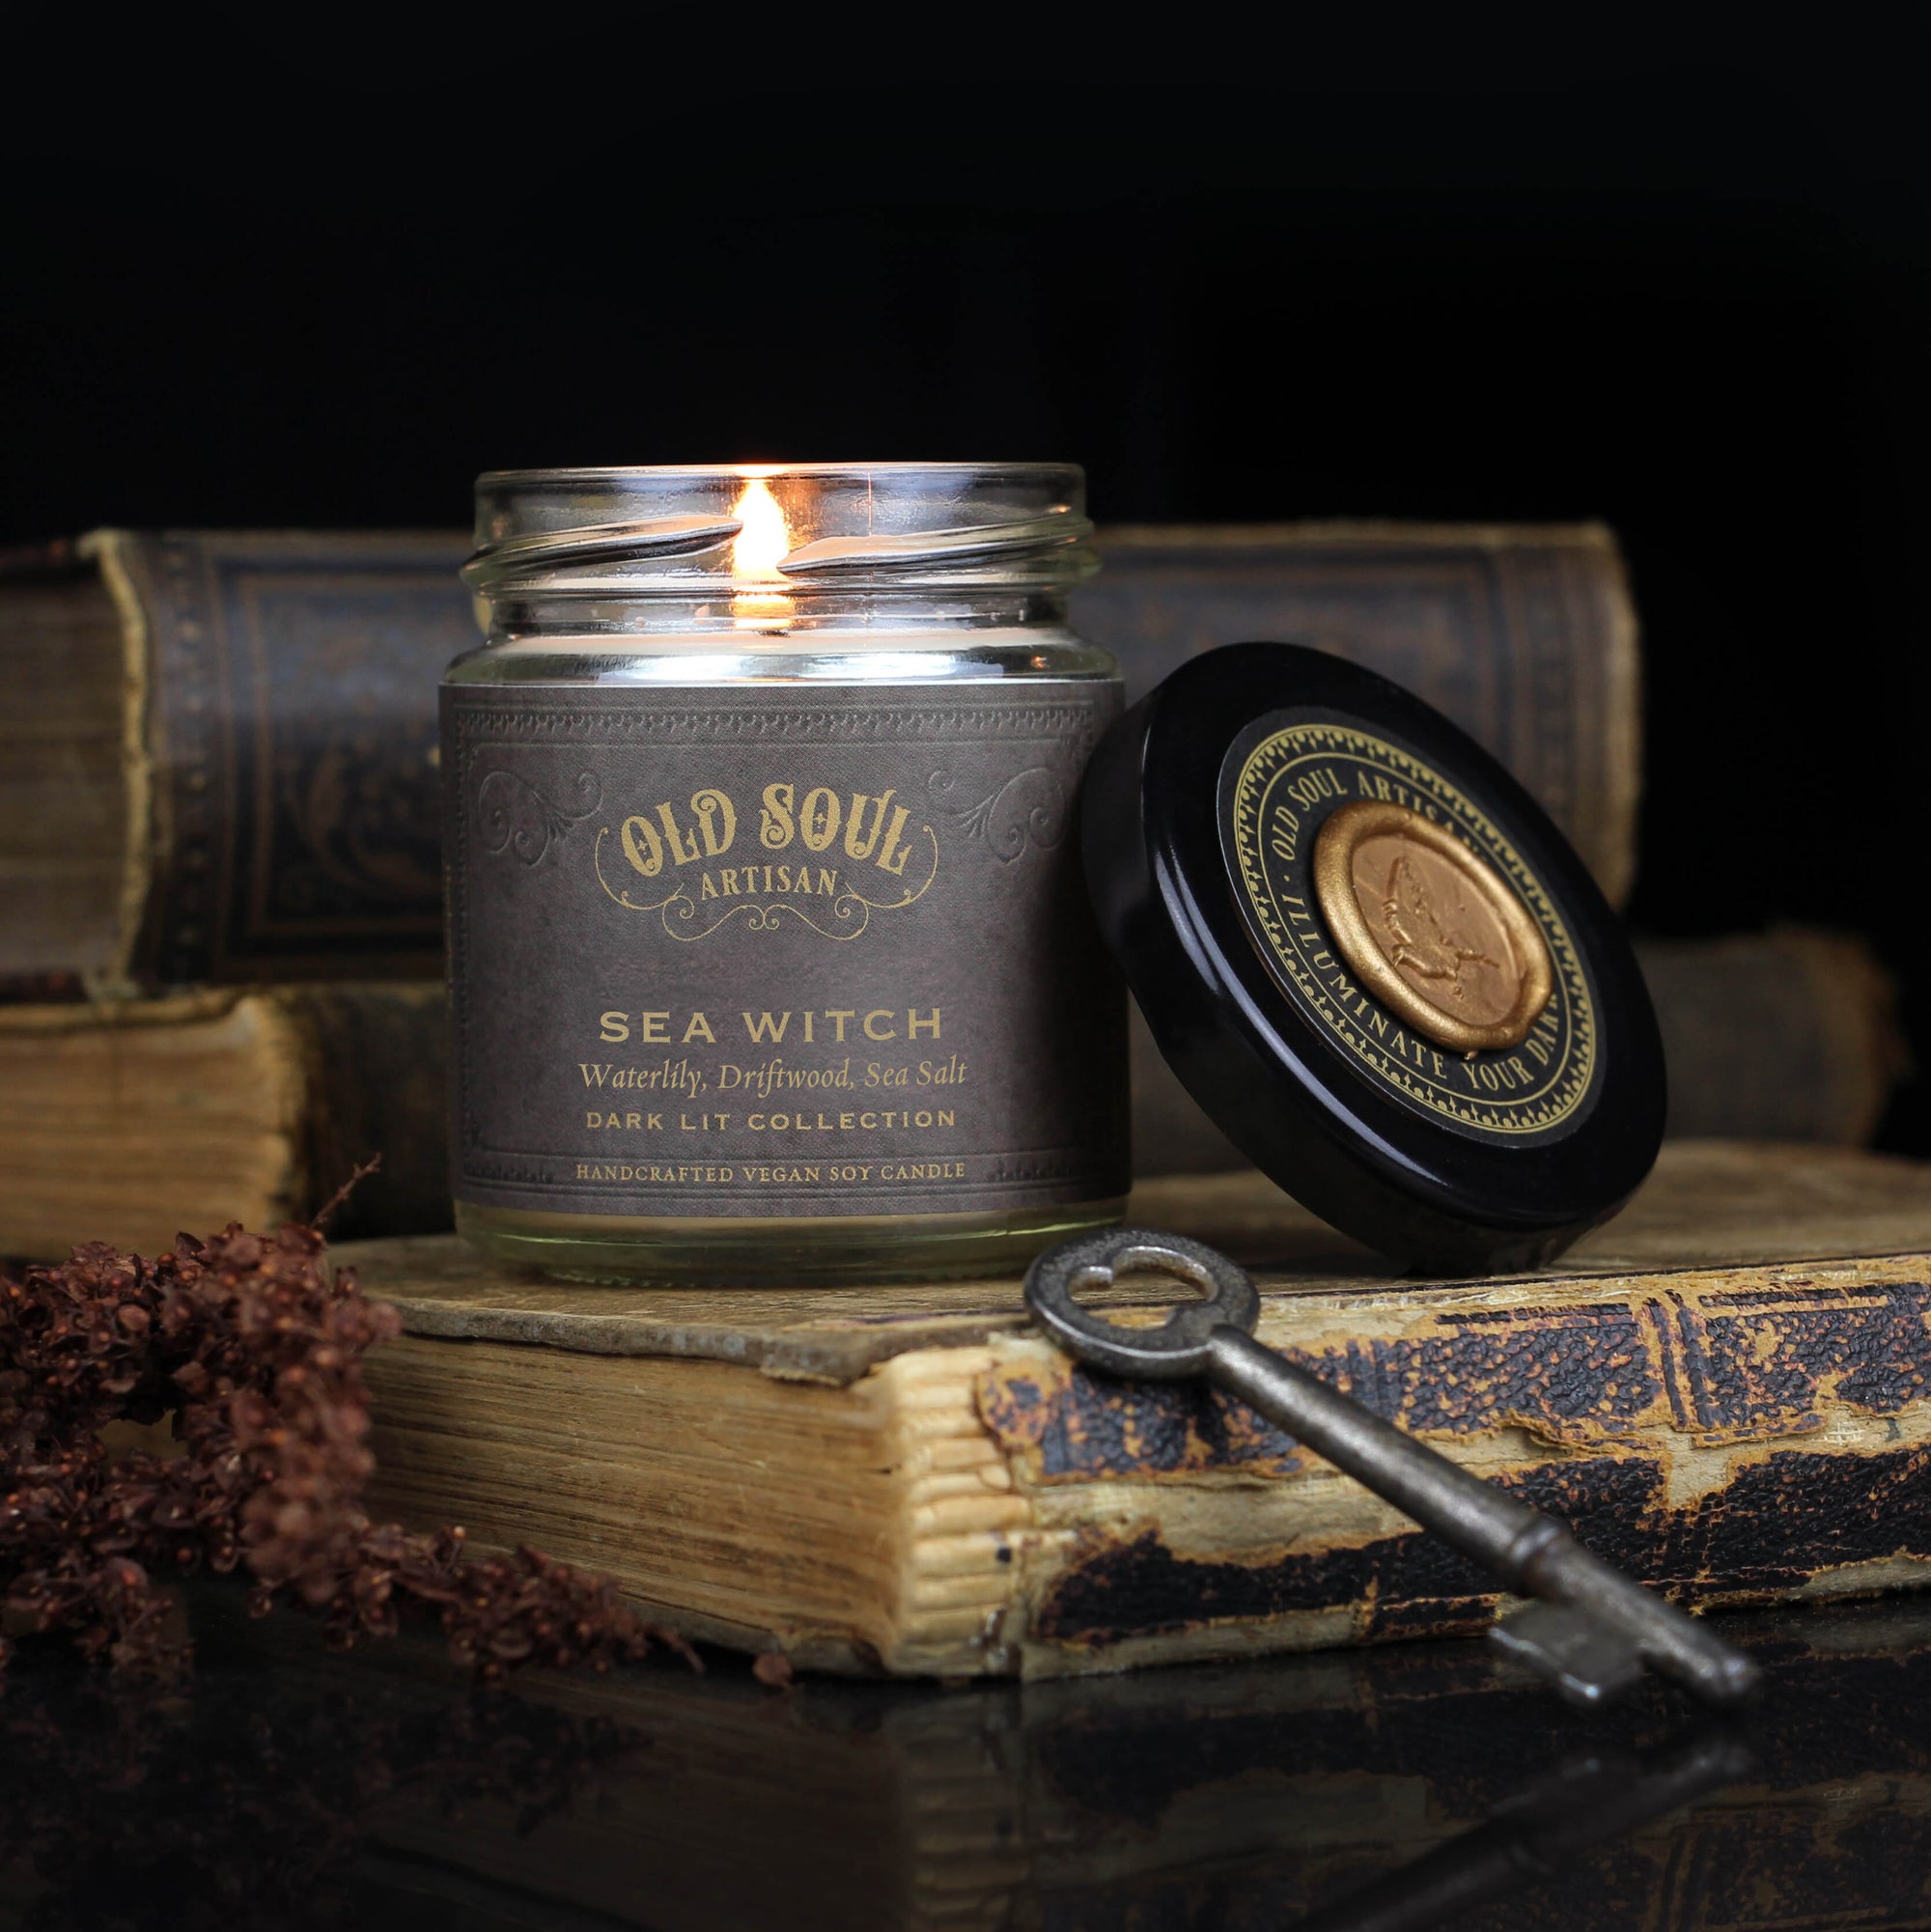 Sea Witch - waterlily, driftwood, sea salt soy candle